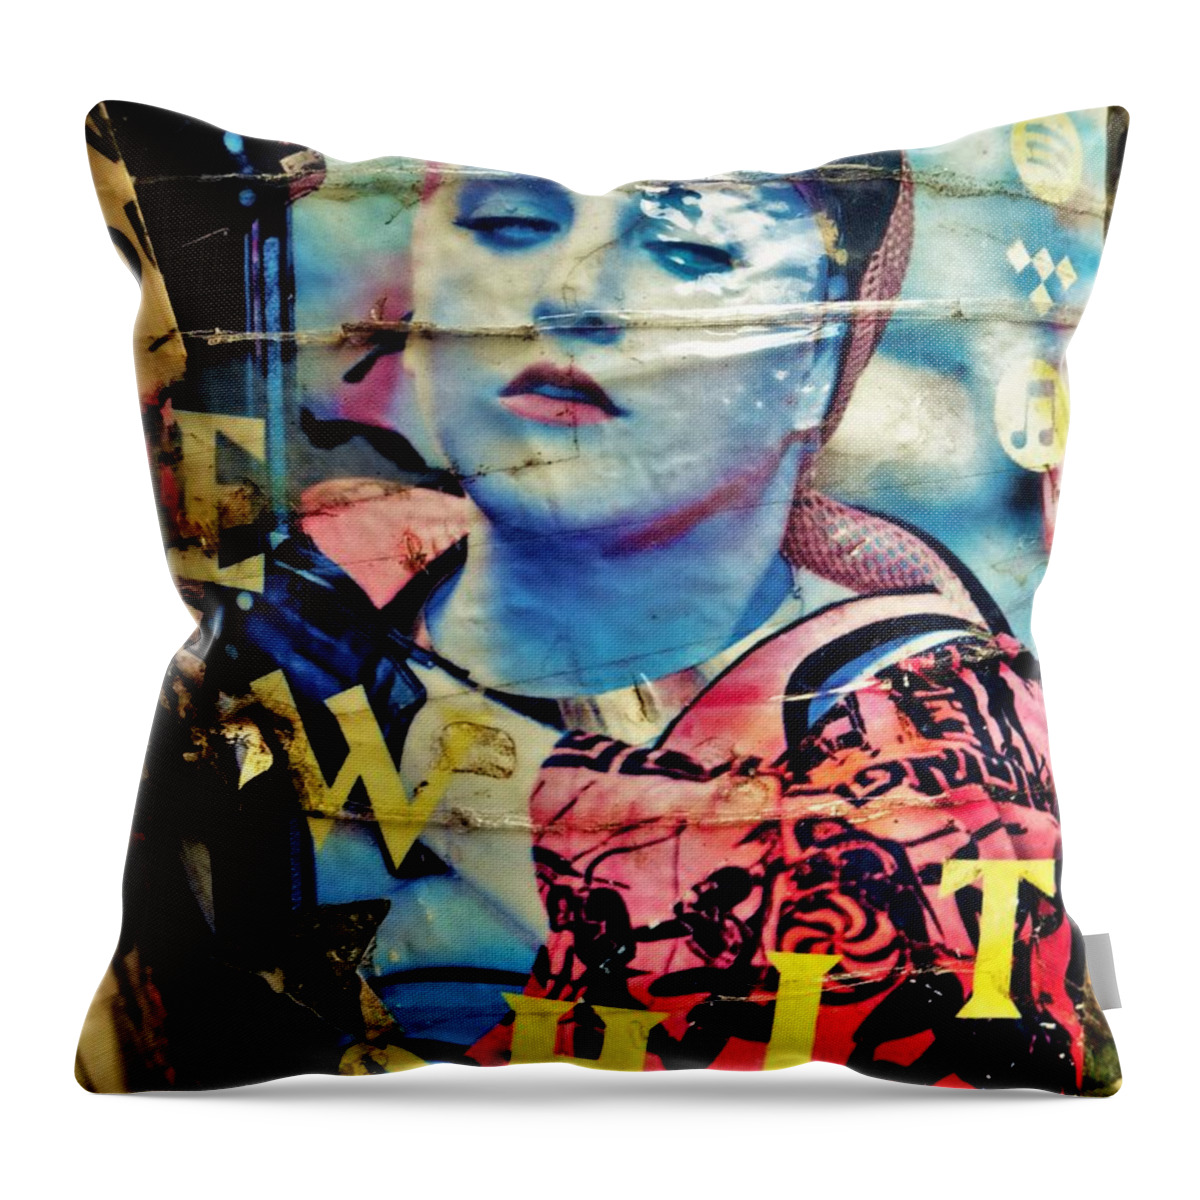 Woman Throw Pillow featuring the photograph Williamsburg Brooklyn Woman Mural by Funkpix Photo Hunter